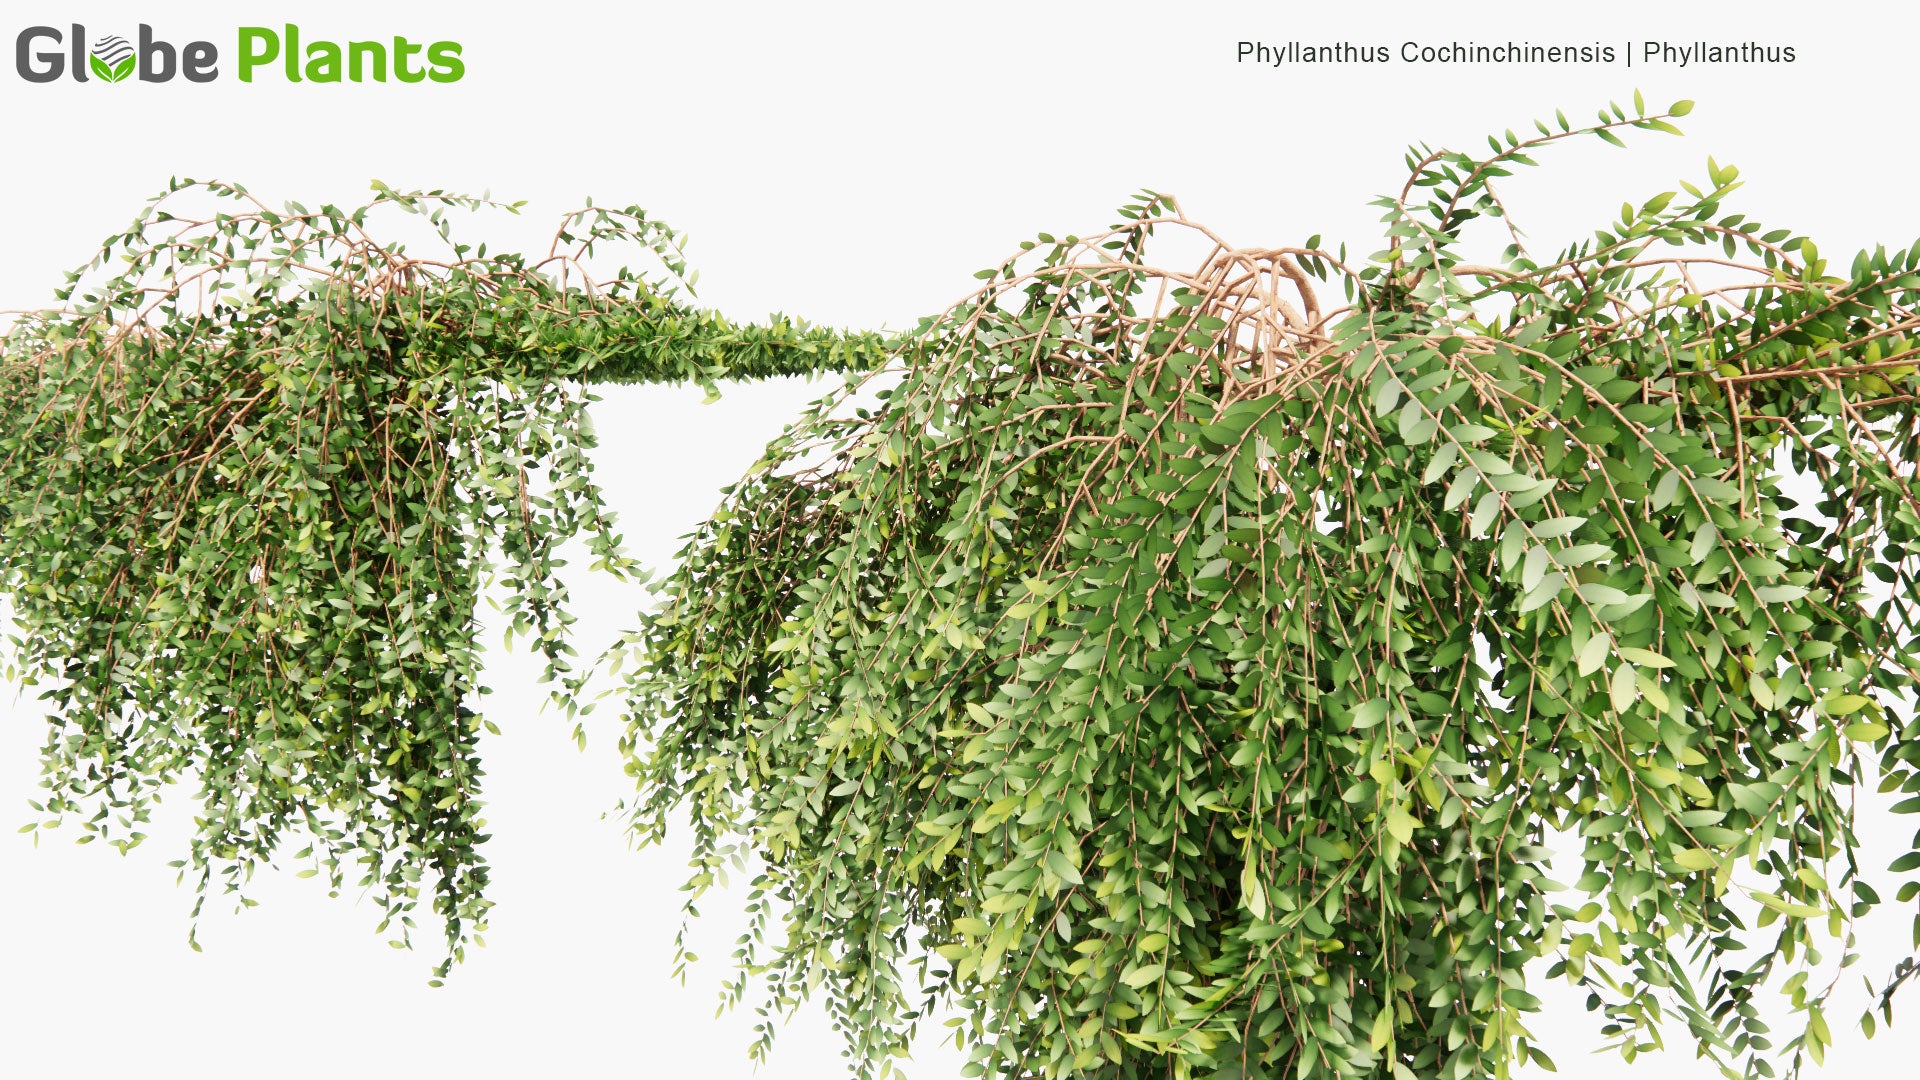 Low Poly Phyllanthus Cochinchinensis - Phyllanthus (3D Model)